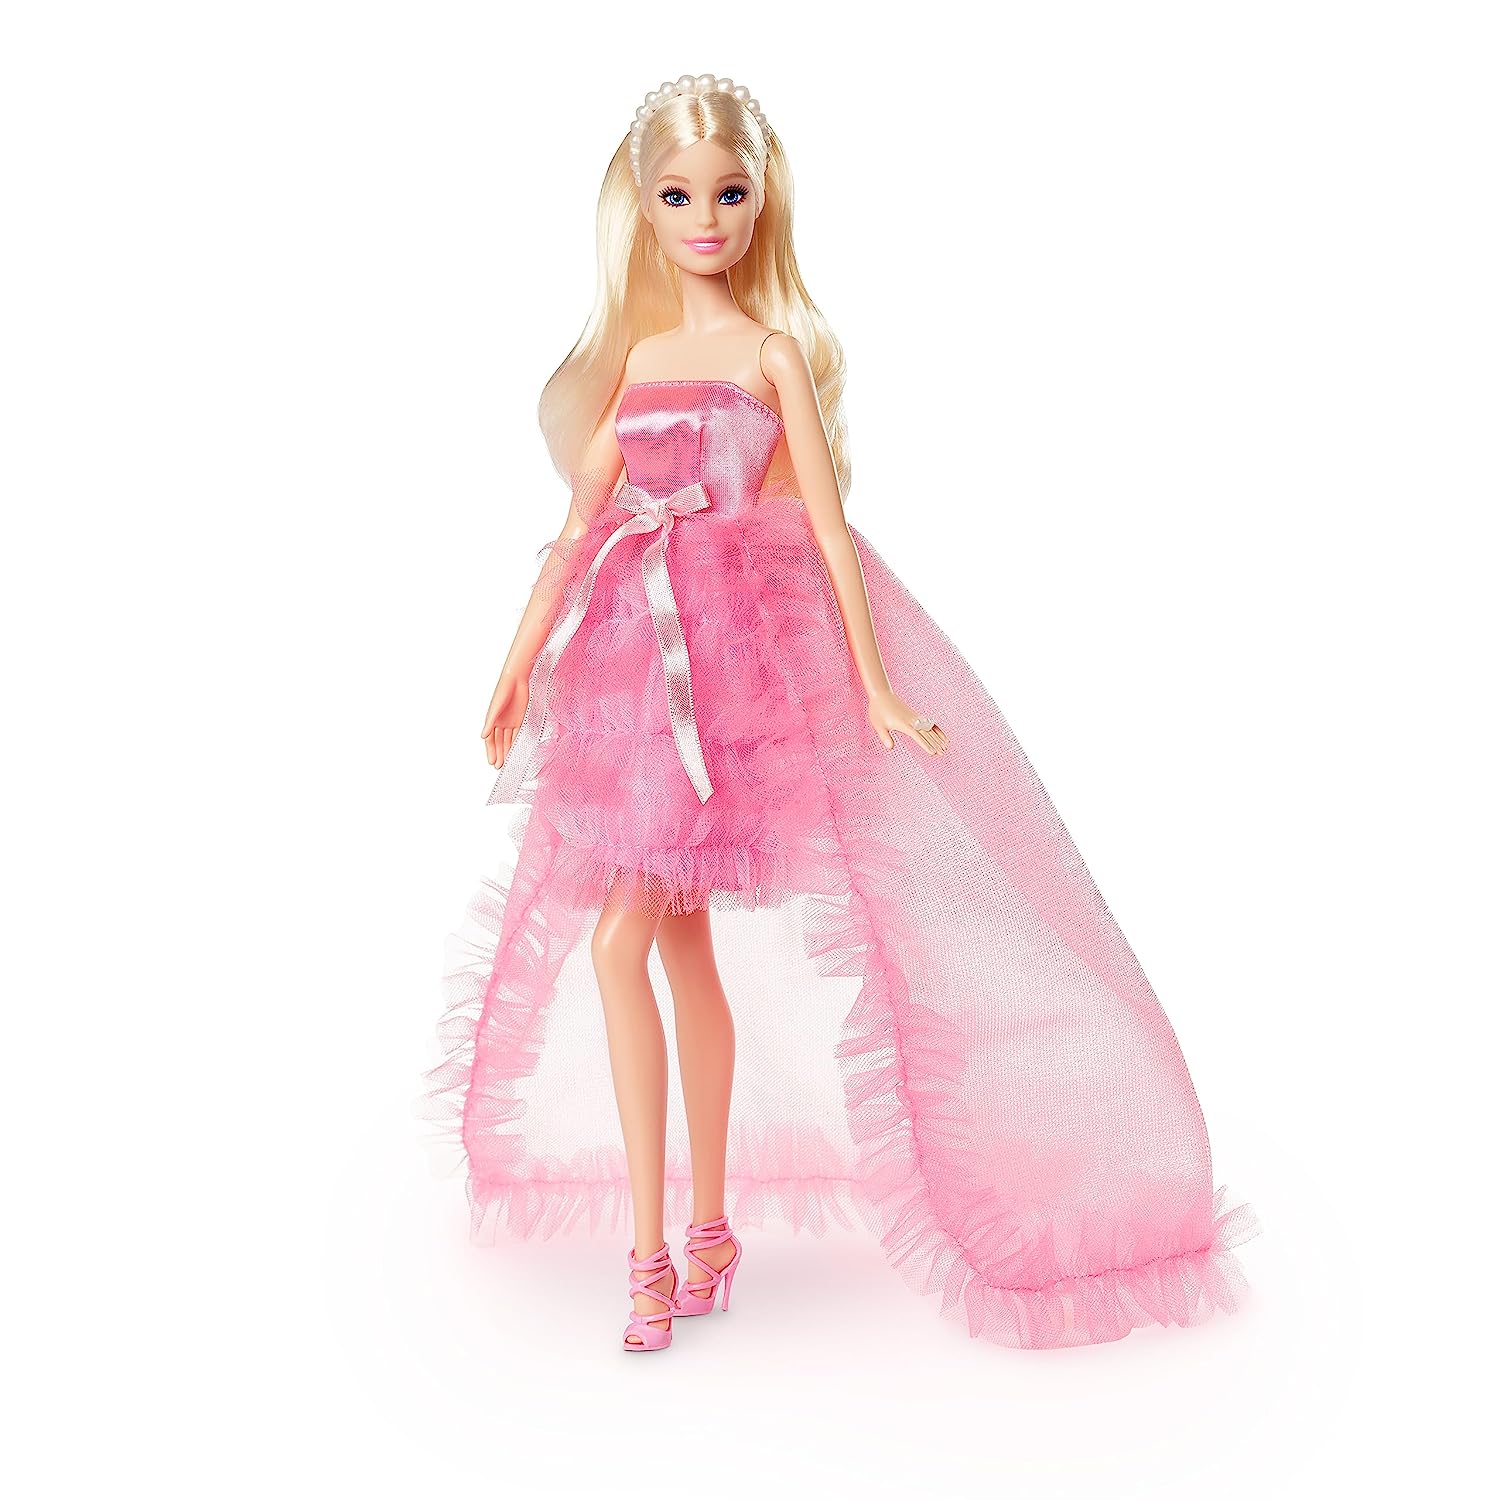 Barbie Birthday Wishes Blonde Doll in Pink Satin and Tulle Dress for Kids Ages 6+